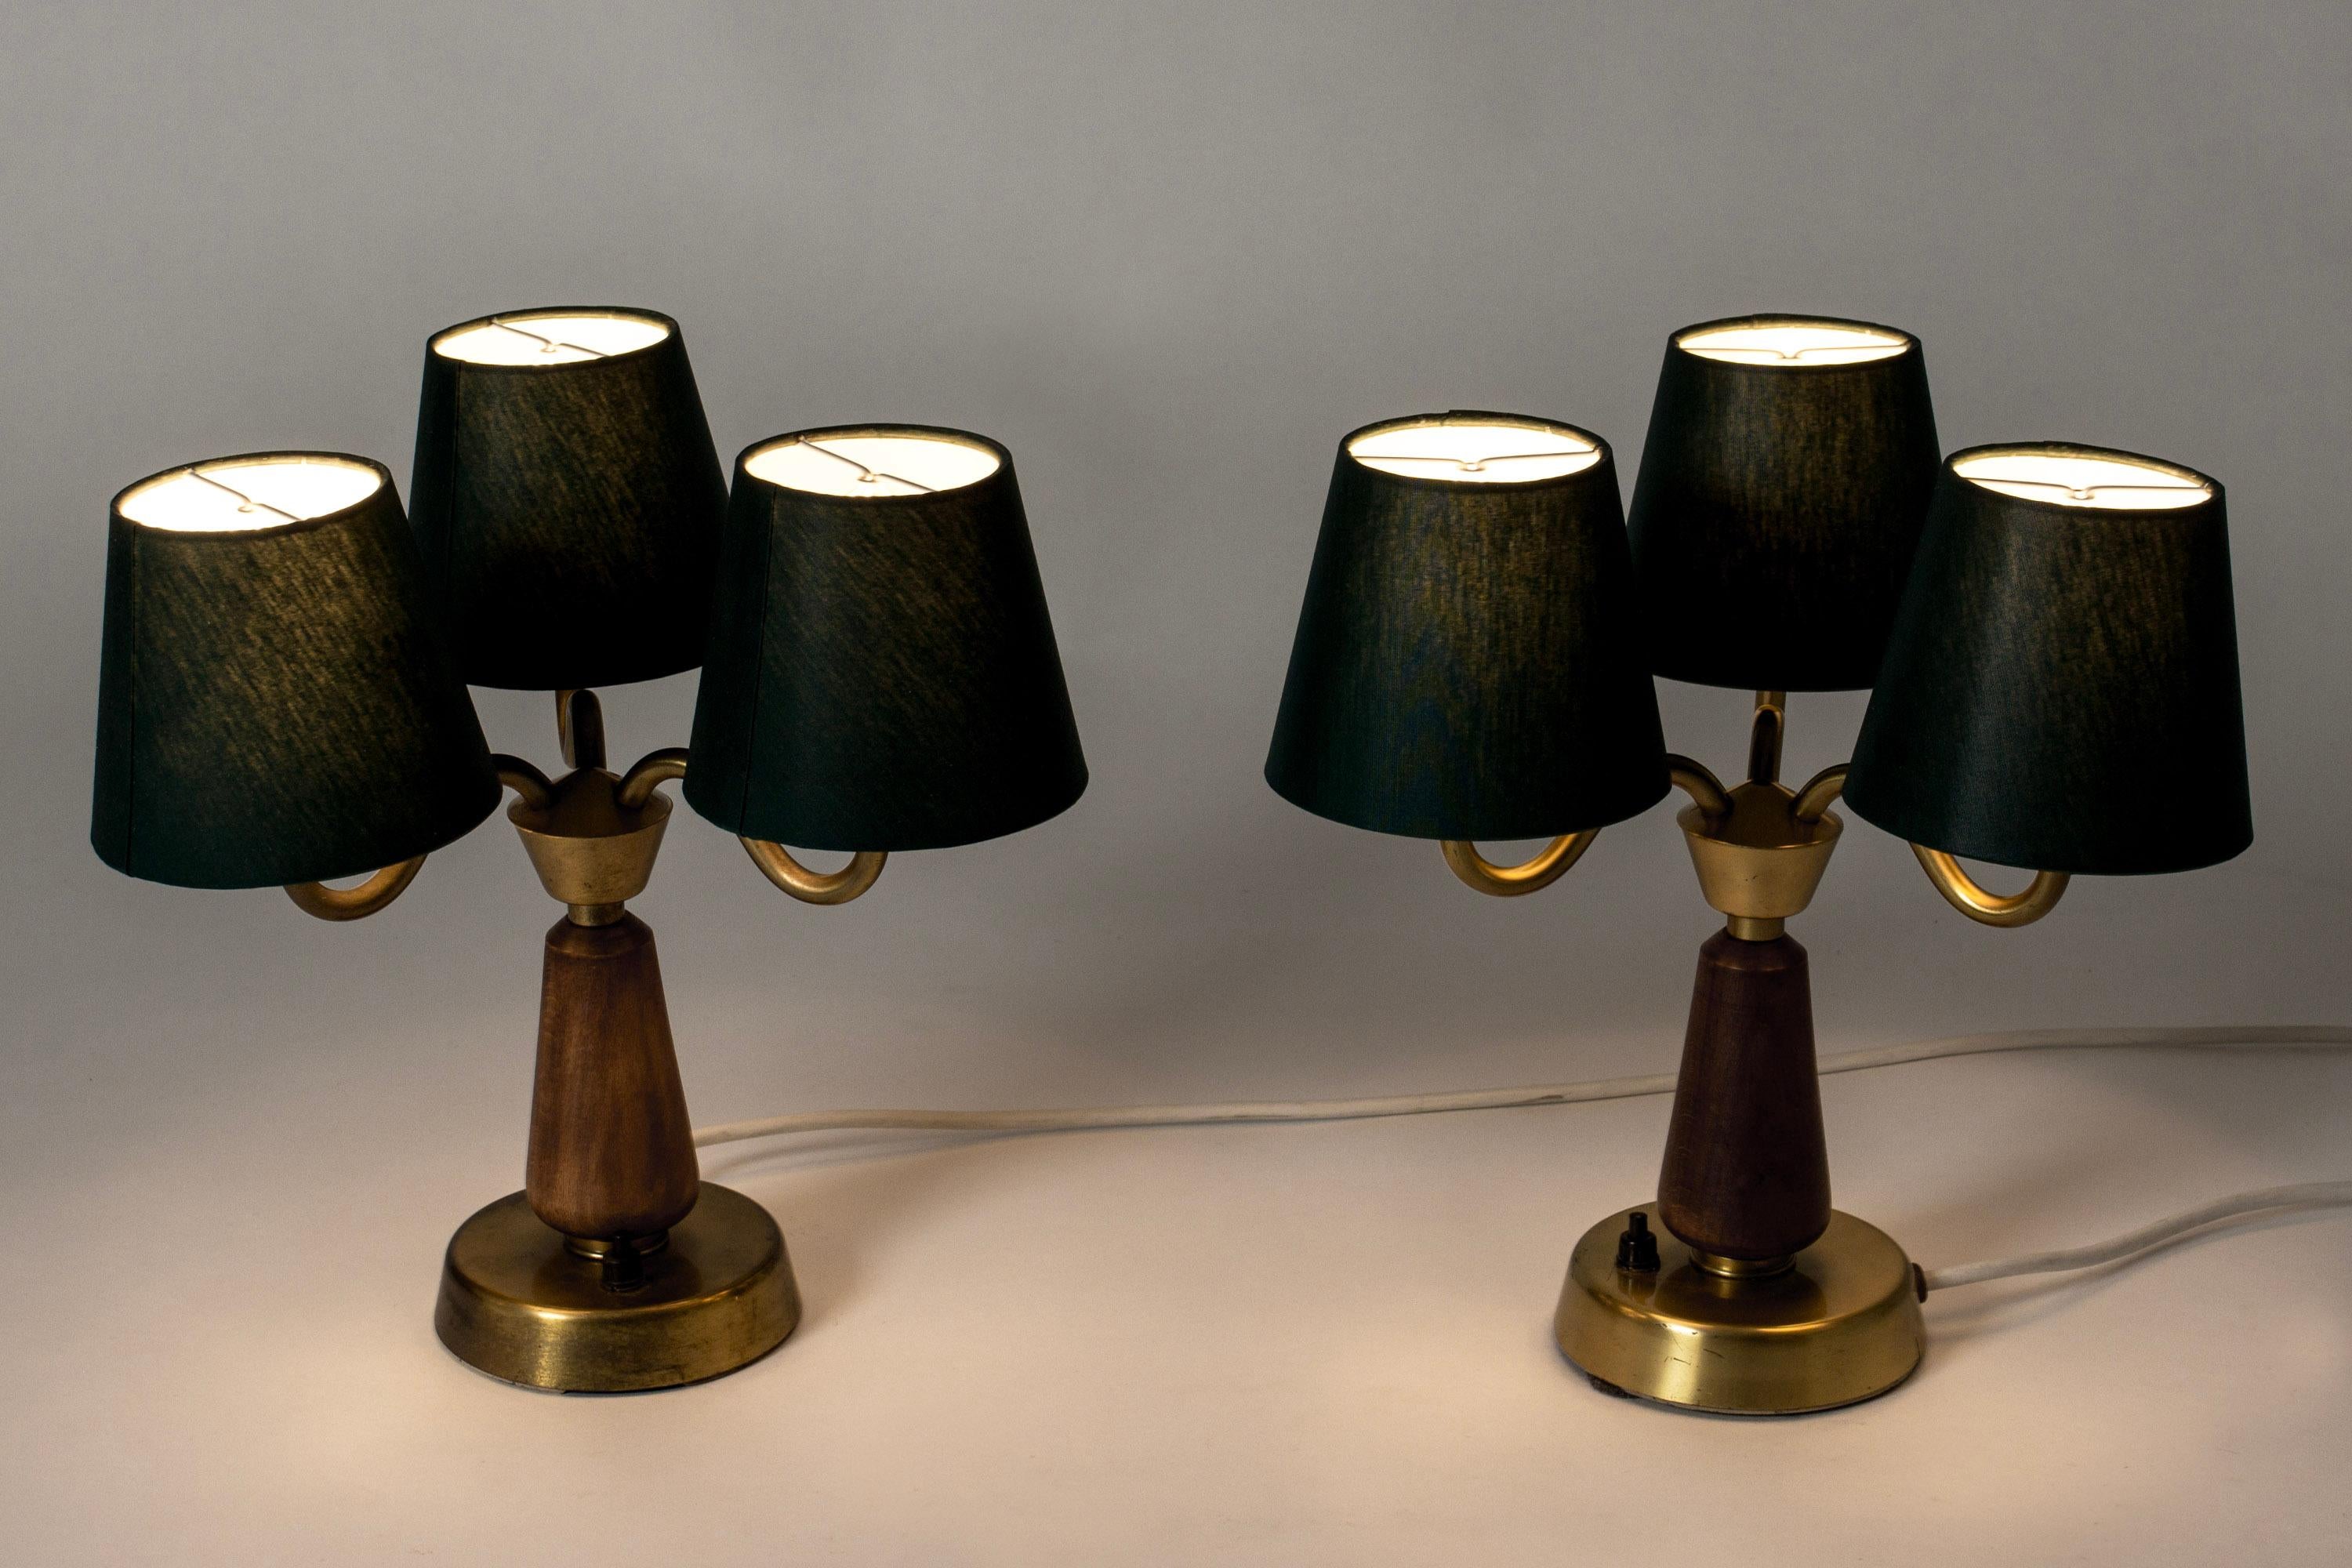 Swedish Midcentury Scandinavian Table Lamps from ASEA, Sweden, 1950s For Sale